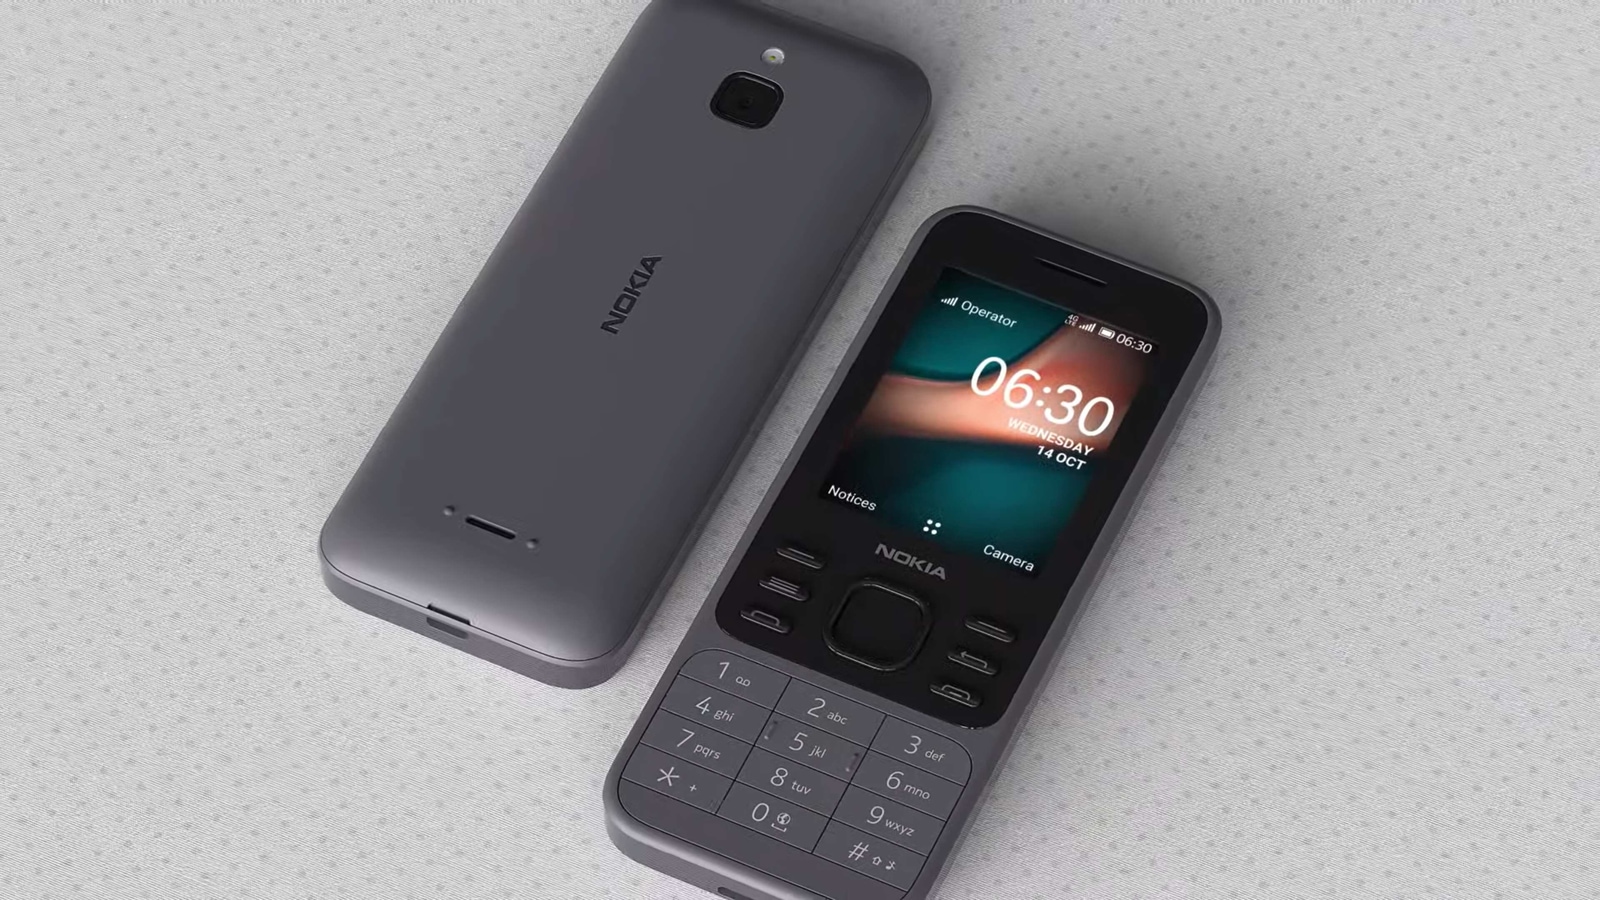 Nokia 8000 4G and Nokia 6300 4G With Google Assistant Support, Snapdragon  210 Processor Launched - News18